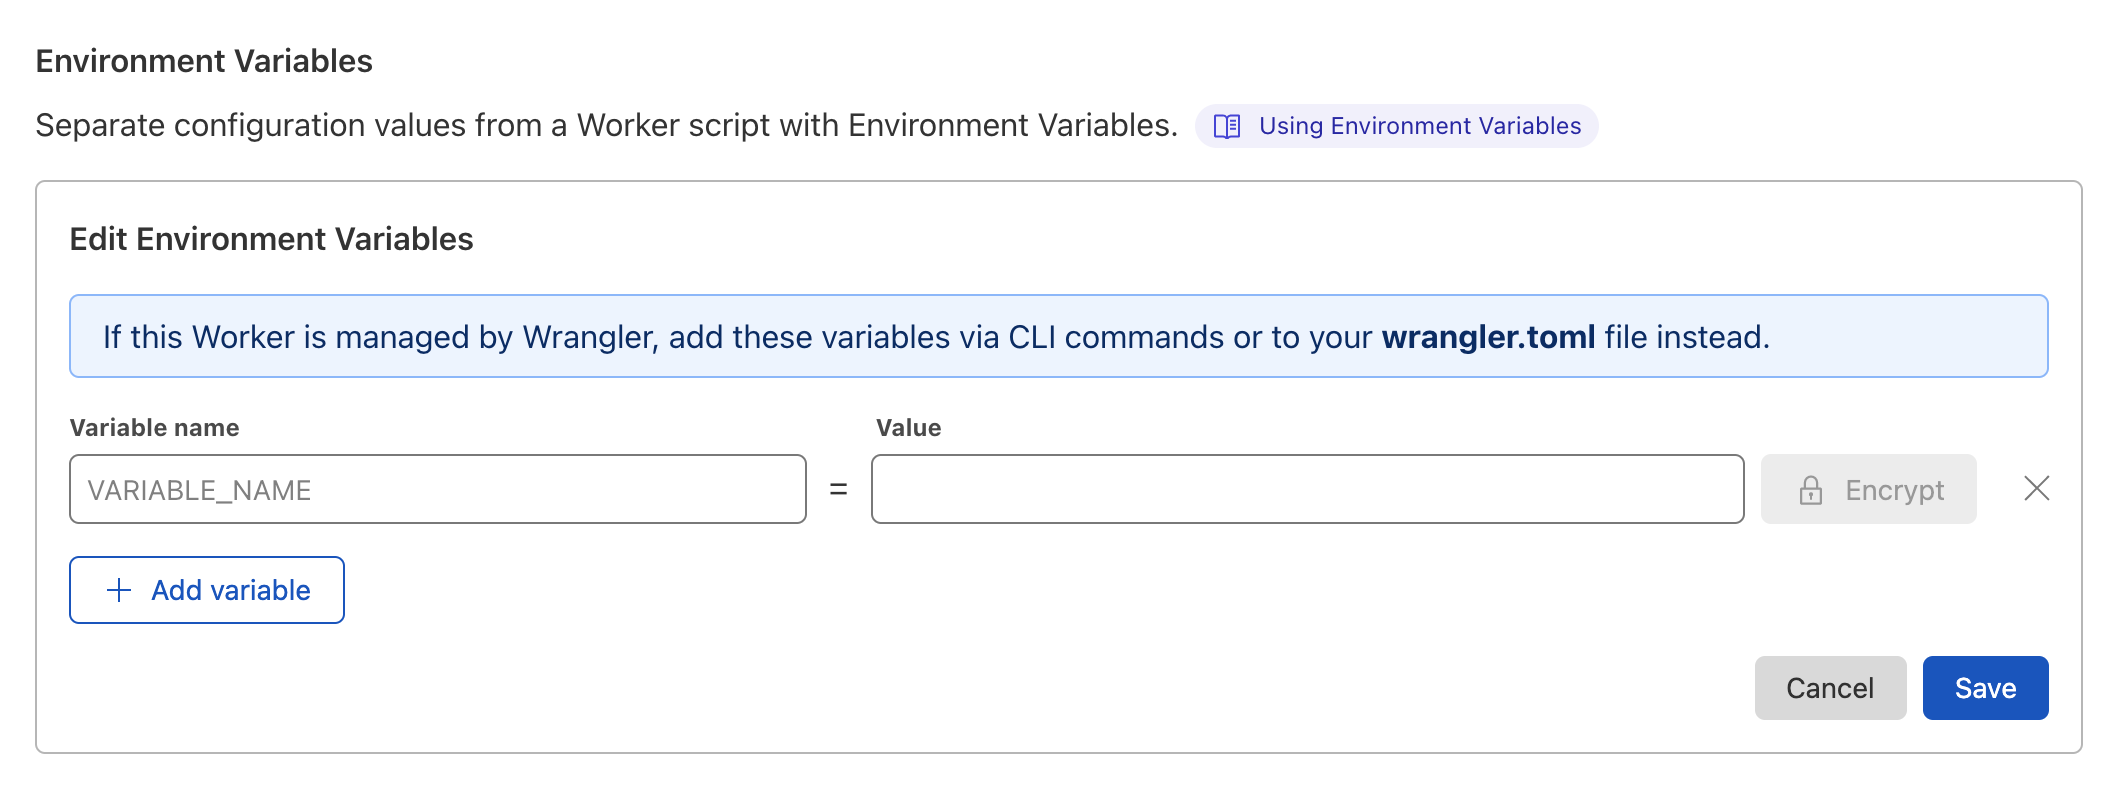 After selecting Add variable, you will be directed to an environment variables configuration page to set up your environment variable name and value